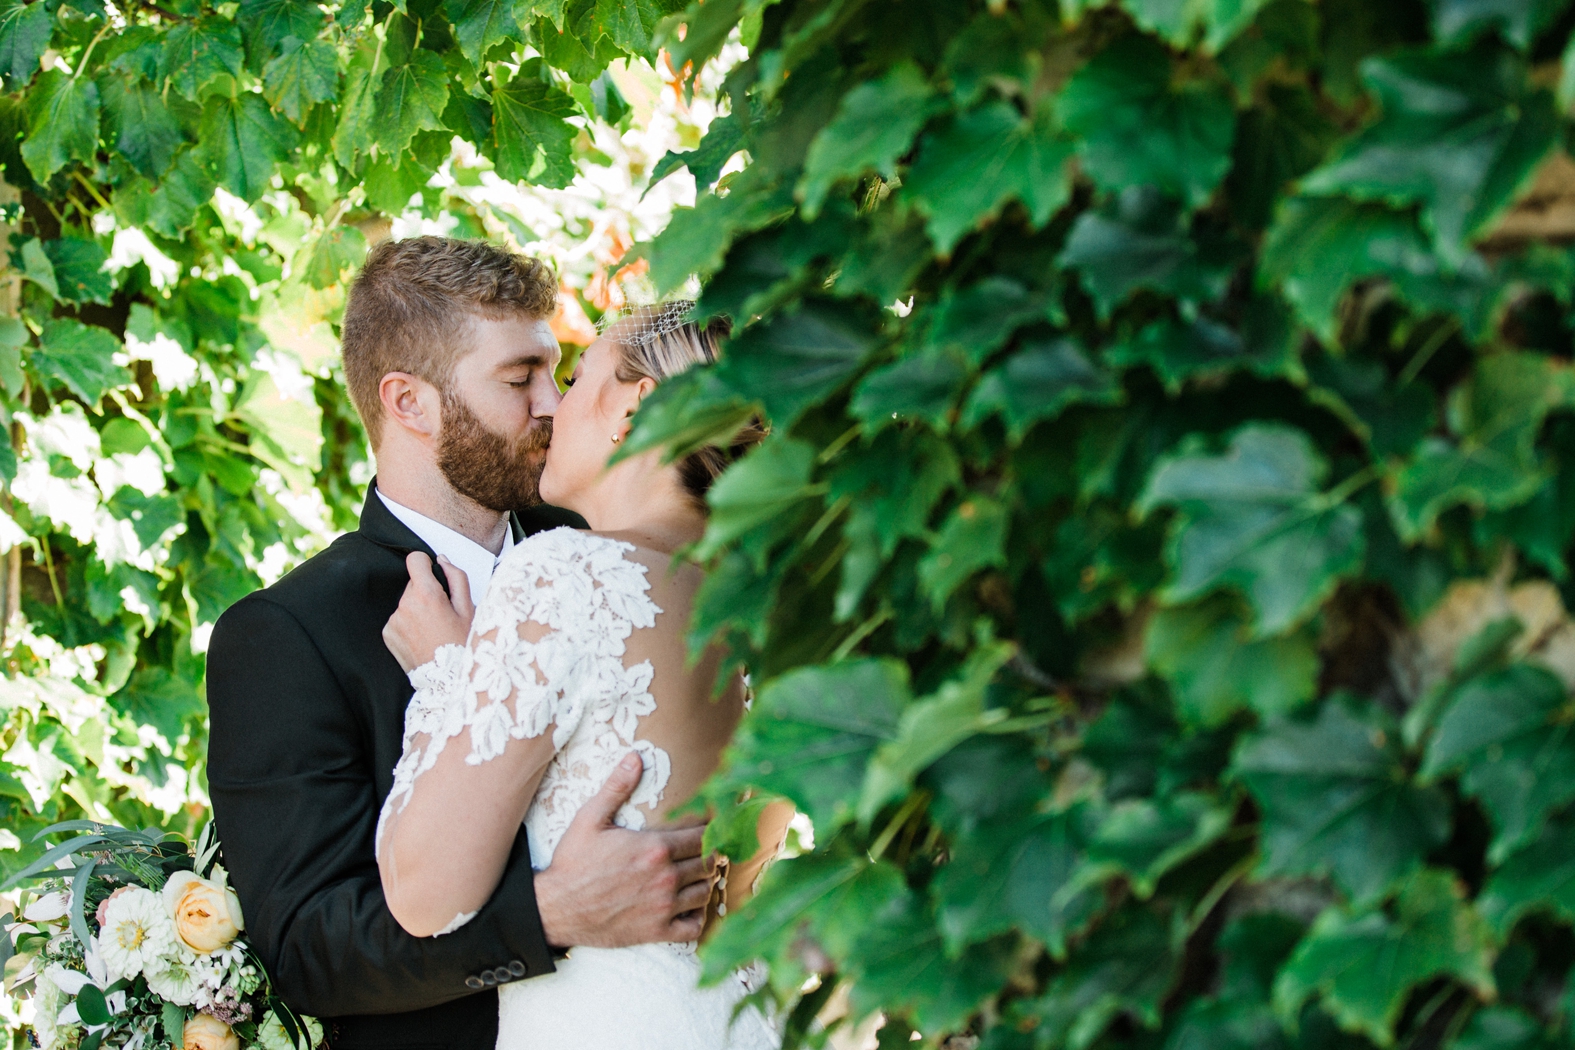 Bride and groom kissing in ivy covered archway. Bride in lace long sleeve backless dress, groom in olive green suit. Peach and ivory bridal bouquet.